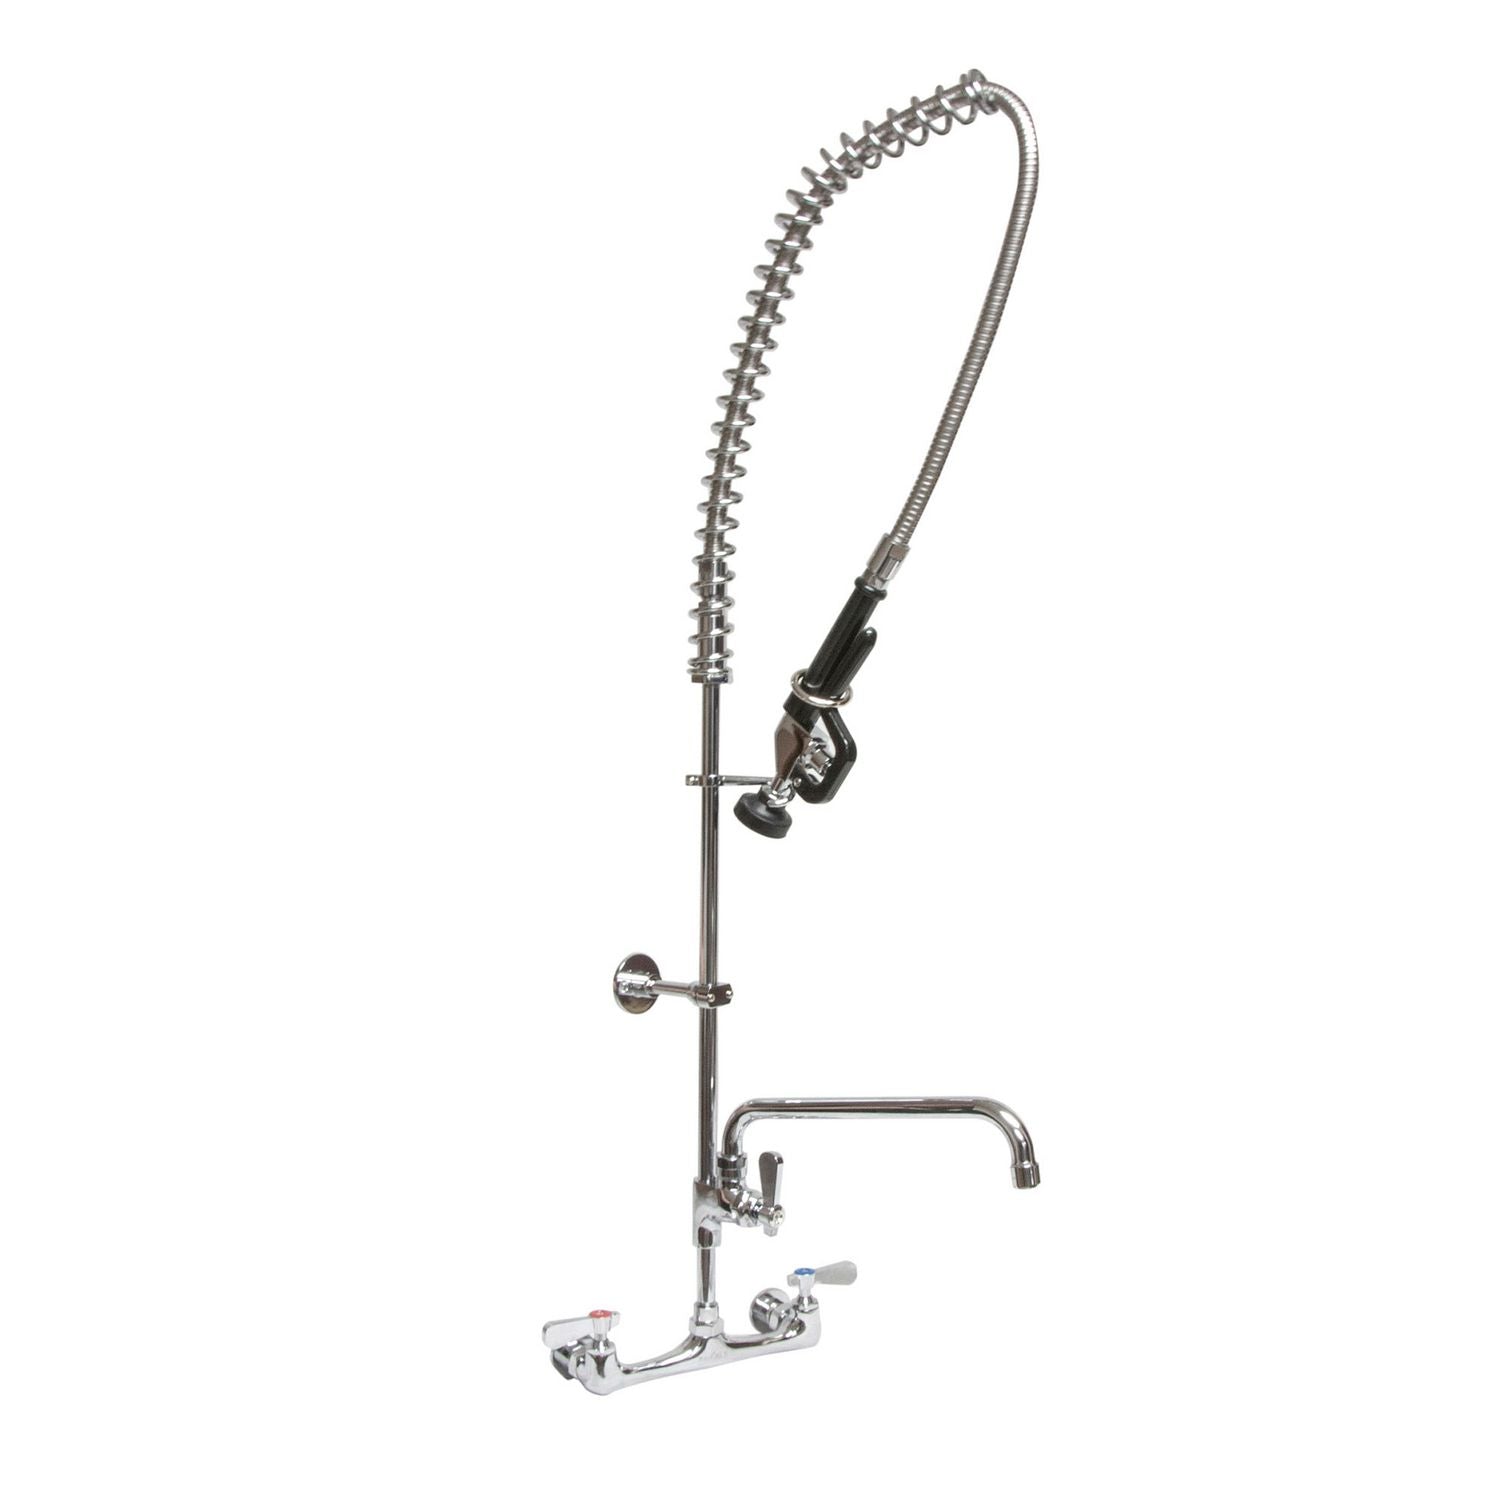 workforce-prerinse-add-a-faucet-462-height-12-reach-chrome-ships-in-4-6-business-days_bkevsmpraf12m - 1